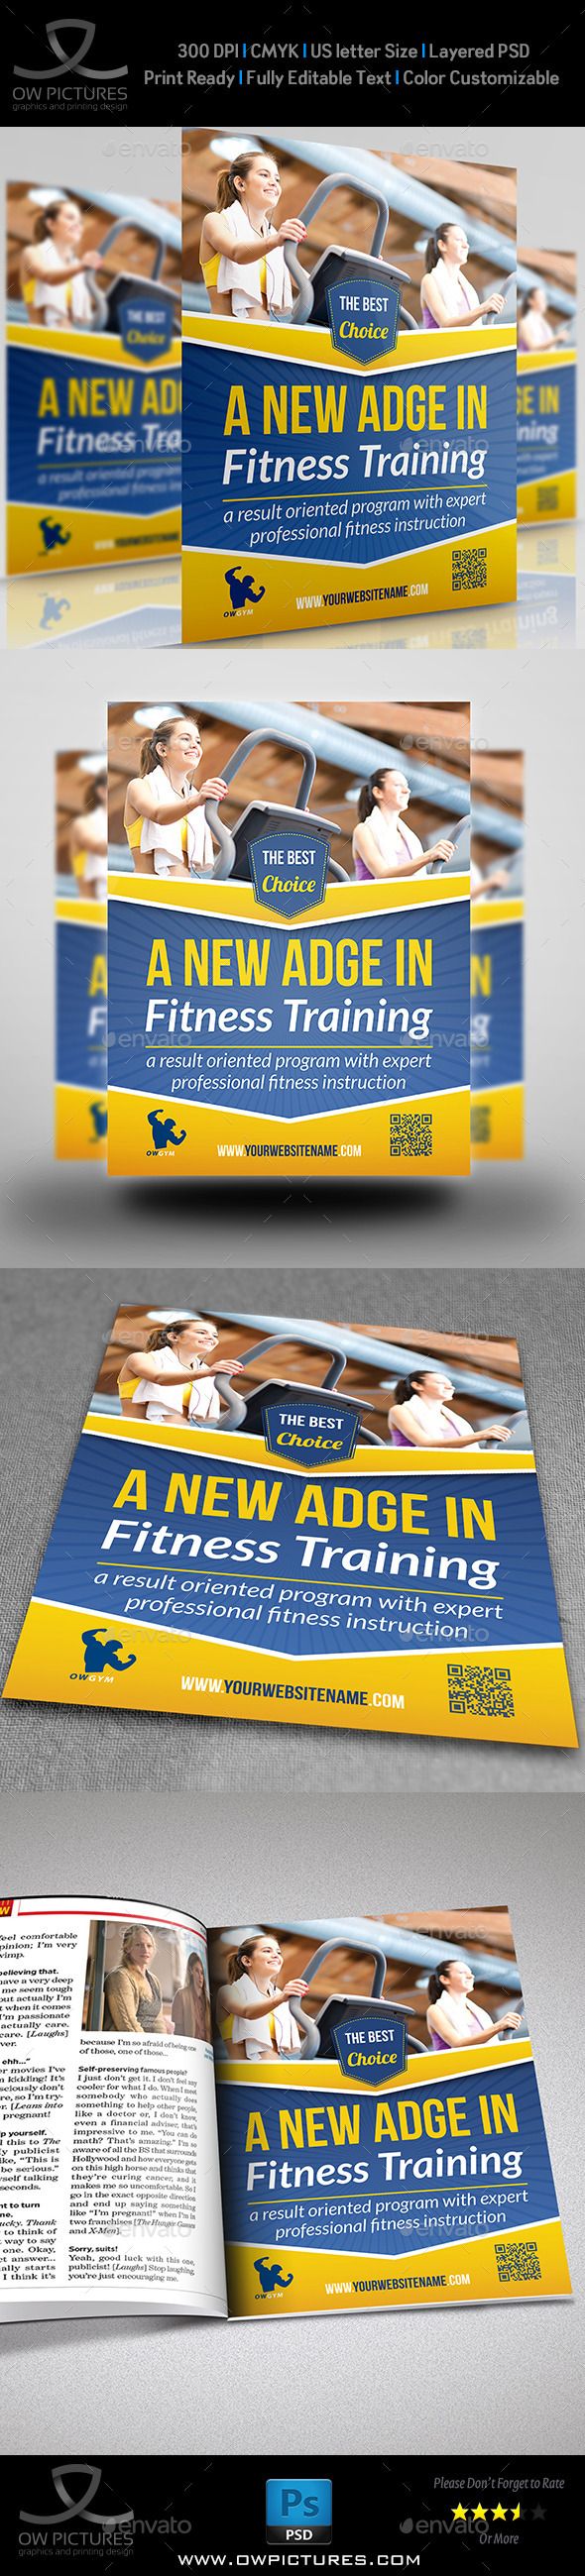 Healthcare-Advertising-Fitness-GYM-Flyer-Template-PSD-Buy-and-Download-graphicriver.net Healthcare Advertising : Fitness - GYM Flyer Template PSD | Buy and Download: graphicriver.net/...